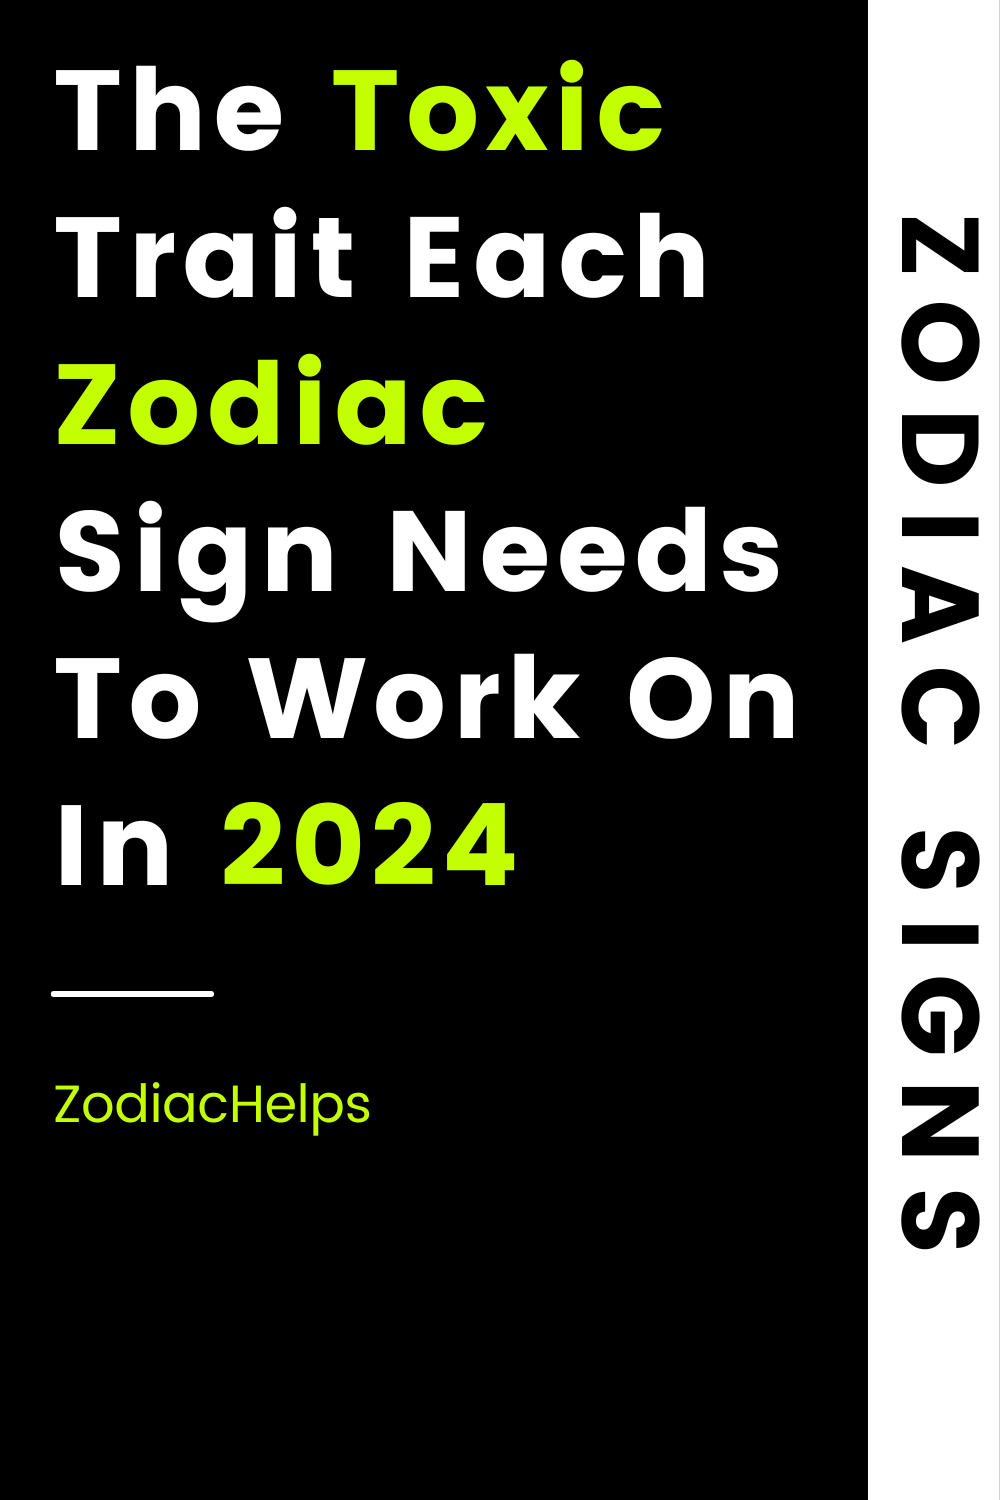 The Toxic Trait Each Zodiac Sign Needs To Work On In 2024